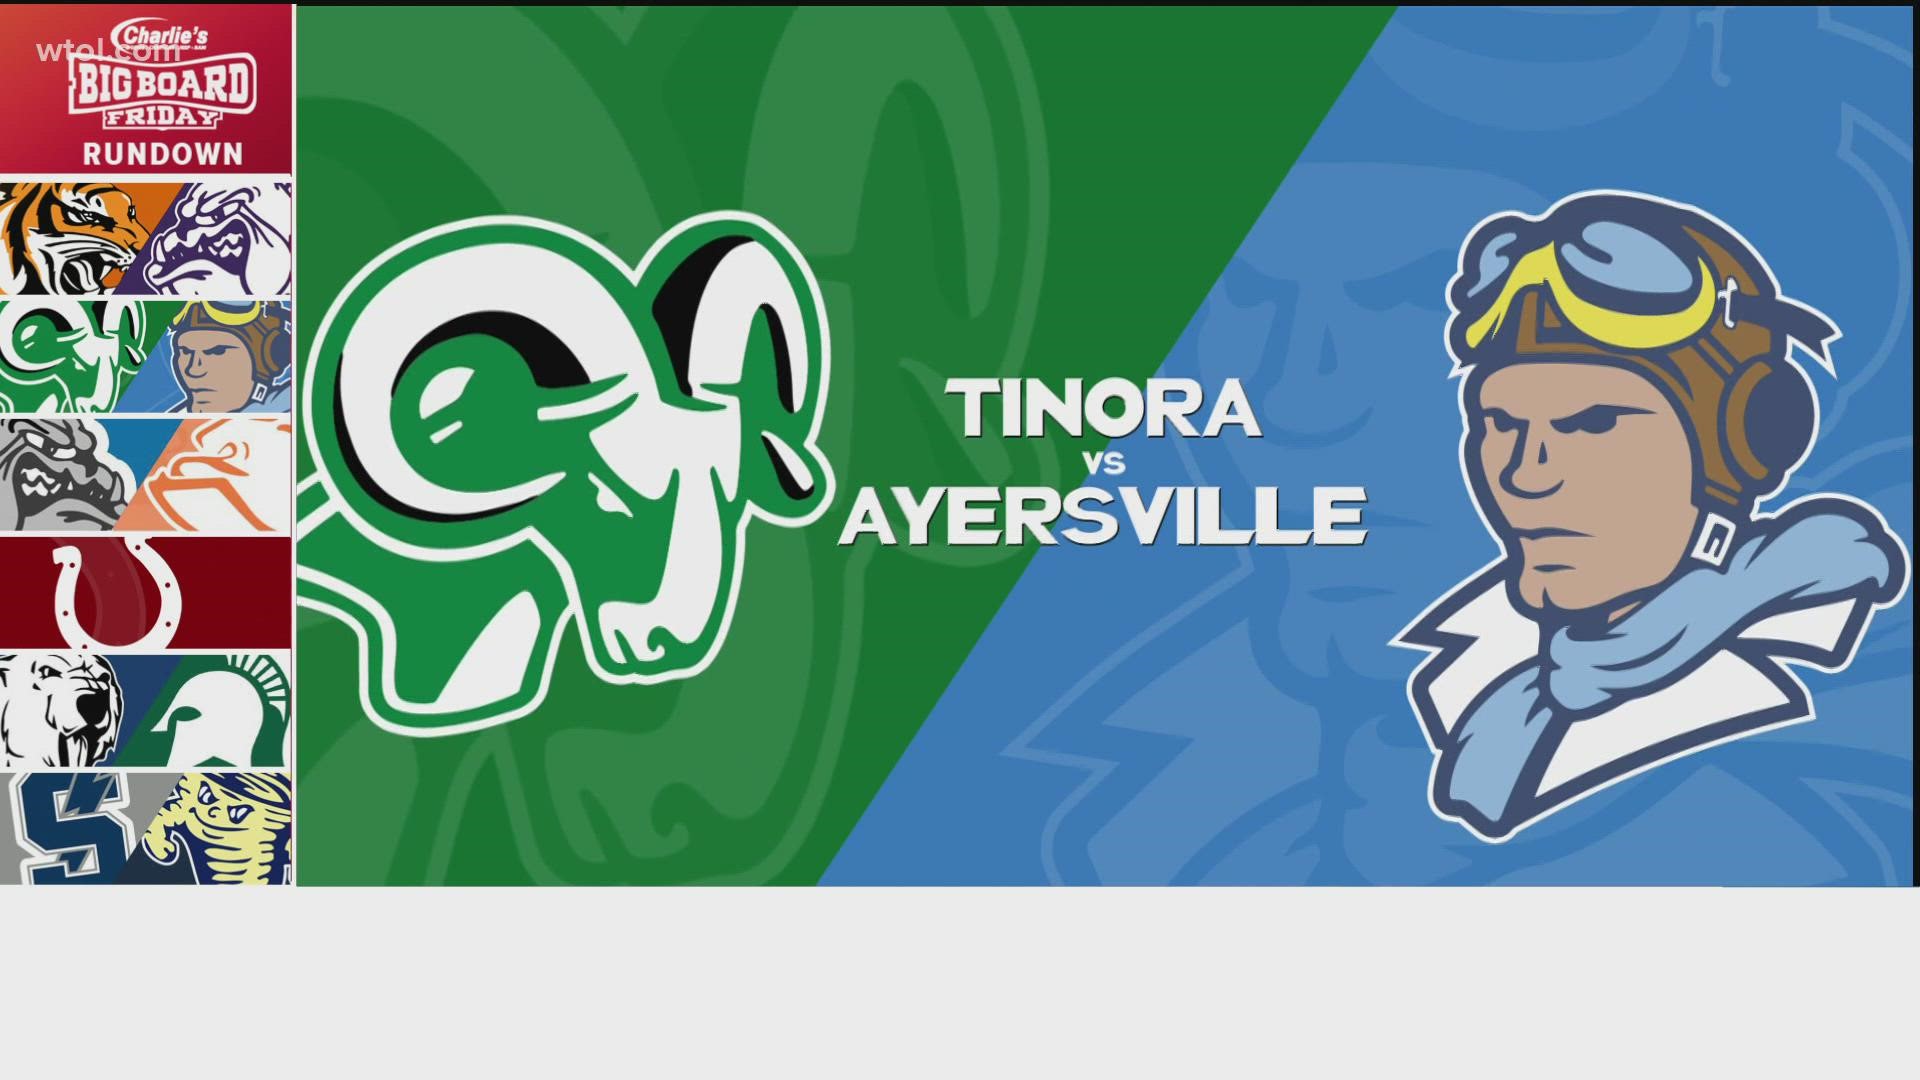 Tinora shuts out Ayersville as the Rams win this rivalry for the fourth year in a row.